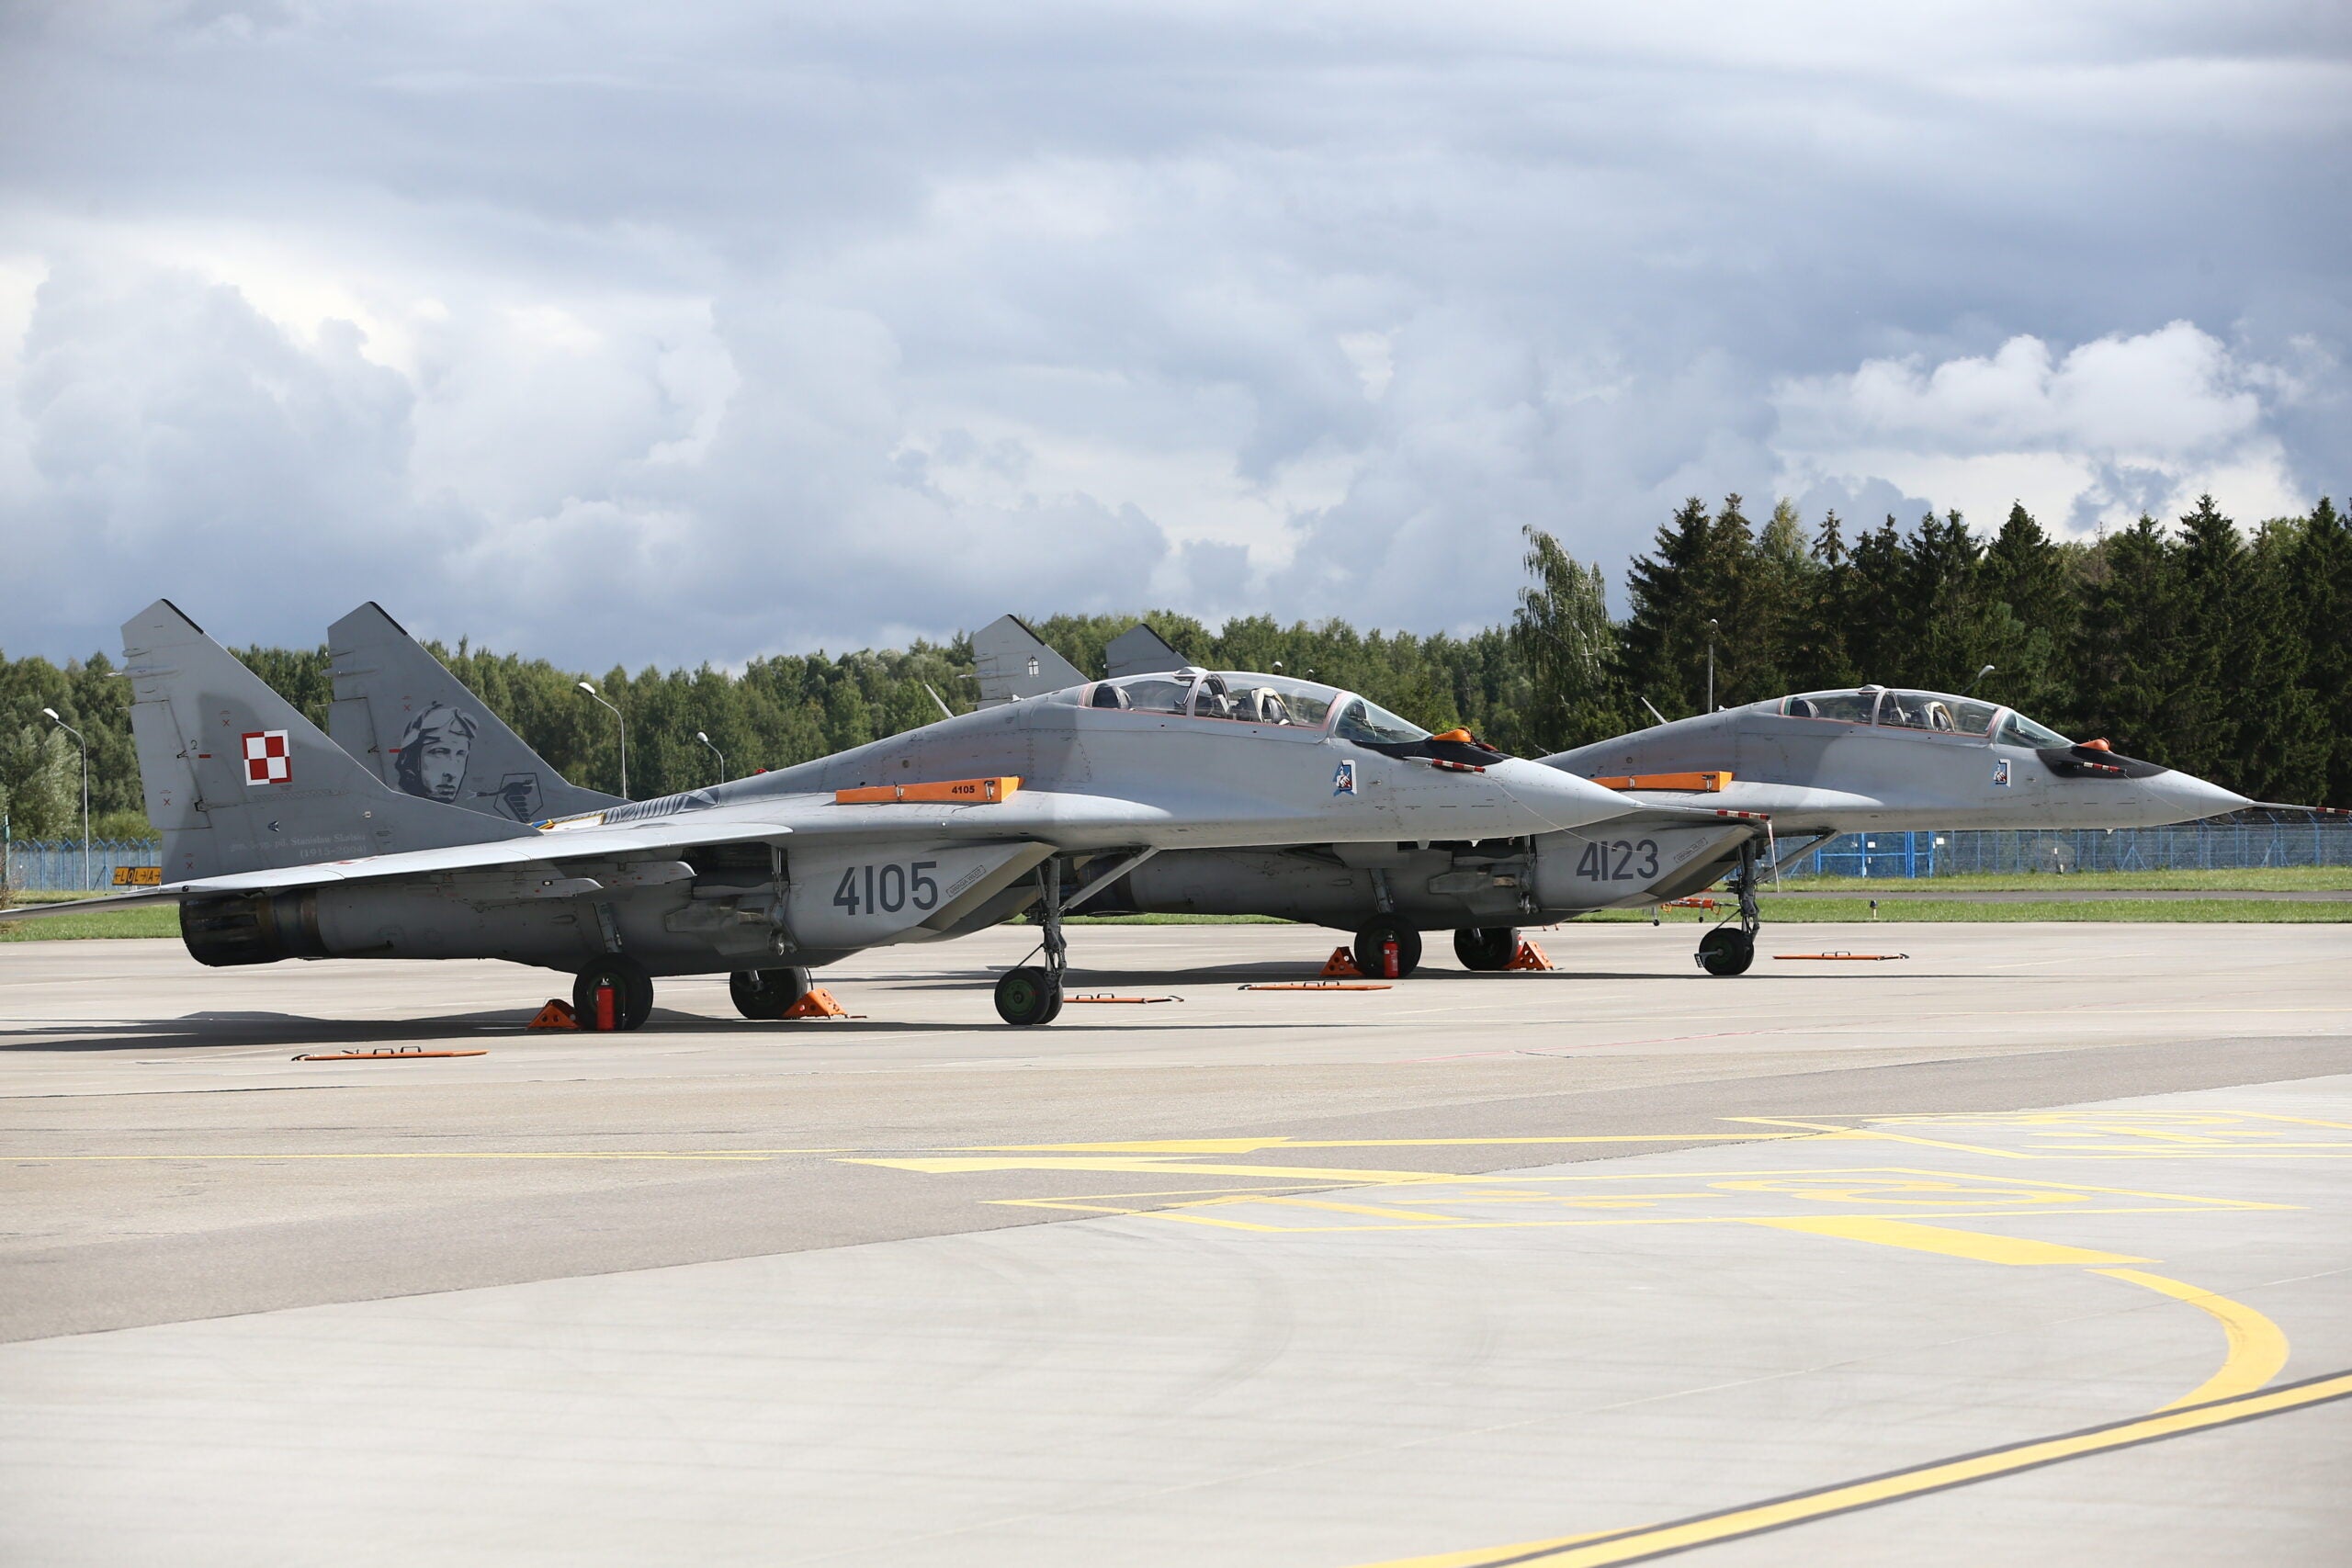 MALBORK, POLAND - AUGUST 27: A view of MIG-29 of Polish Air Forces at 22nd Air Base Command in Malbork, Poland on August 27, 2021. (Photo by Cuneyt Karadag/Anadolu Agency via Getty Images)